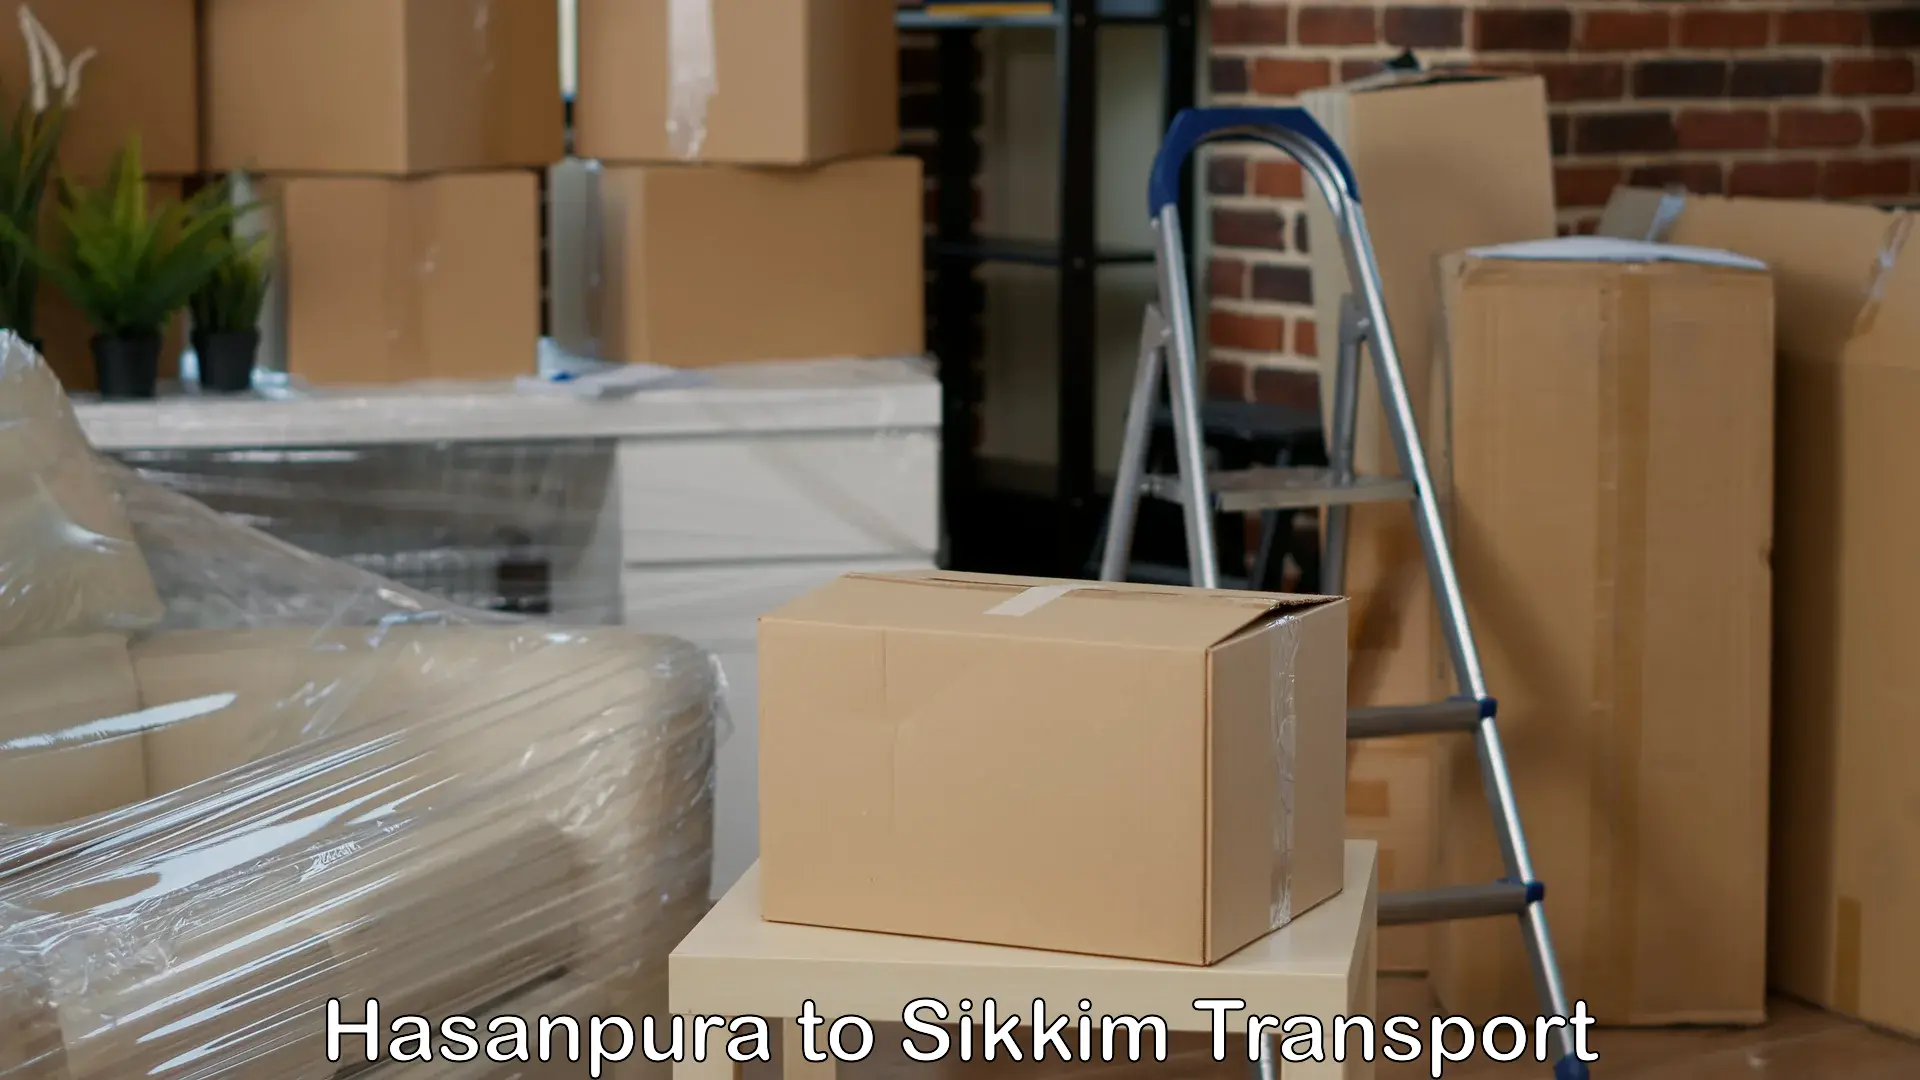 Nearby transport service in Hasanpura to East Sikkim